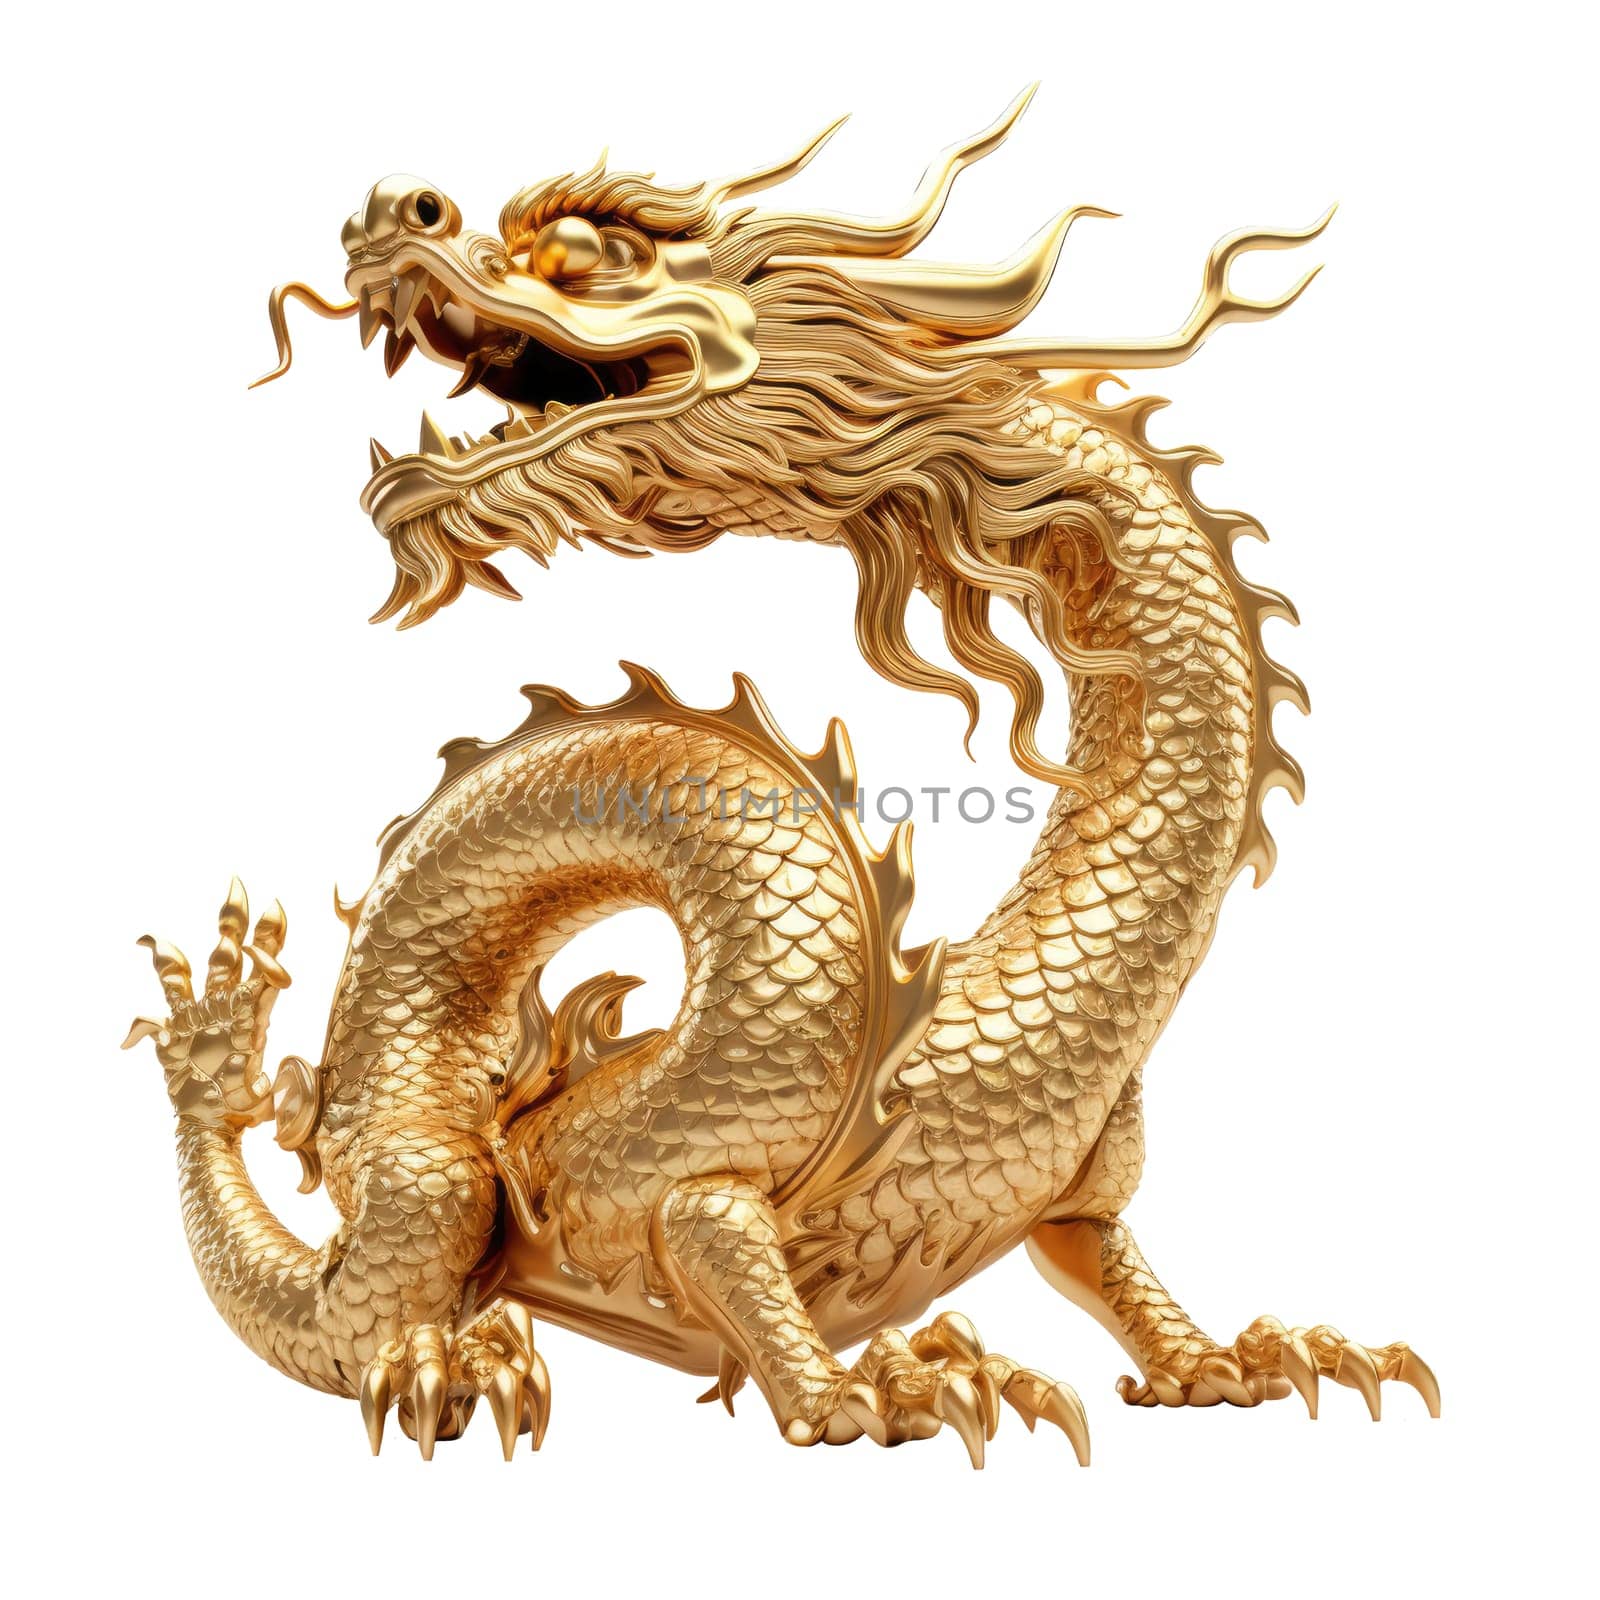 Chinese golden dragon isolated on white. Golden traditional chinese dragon isolated on white background.